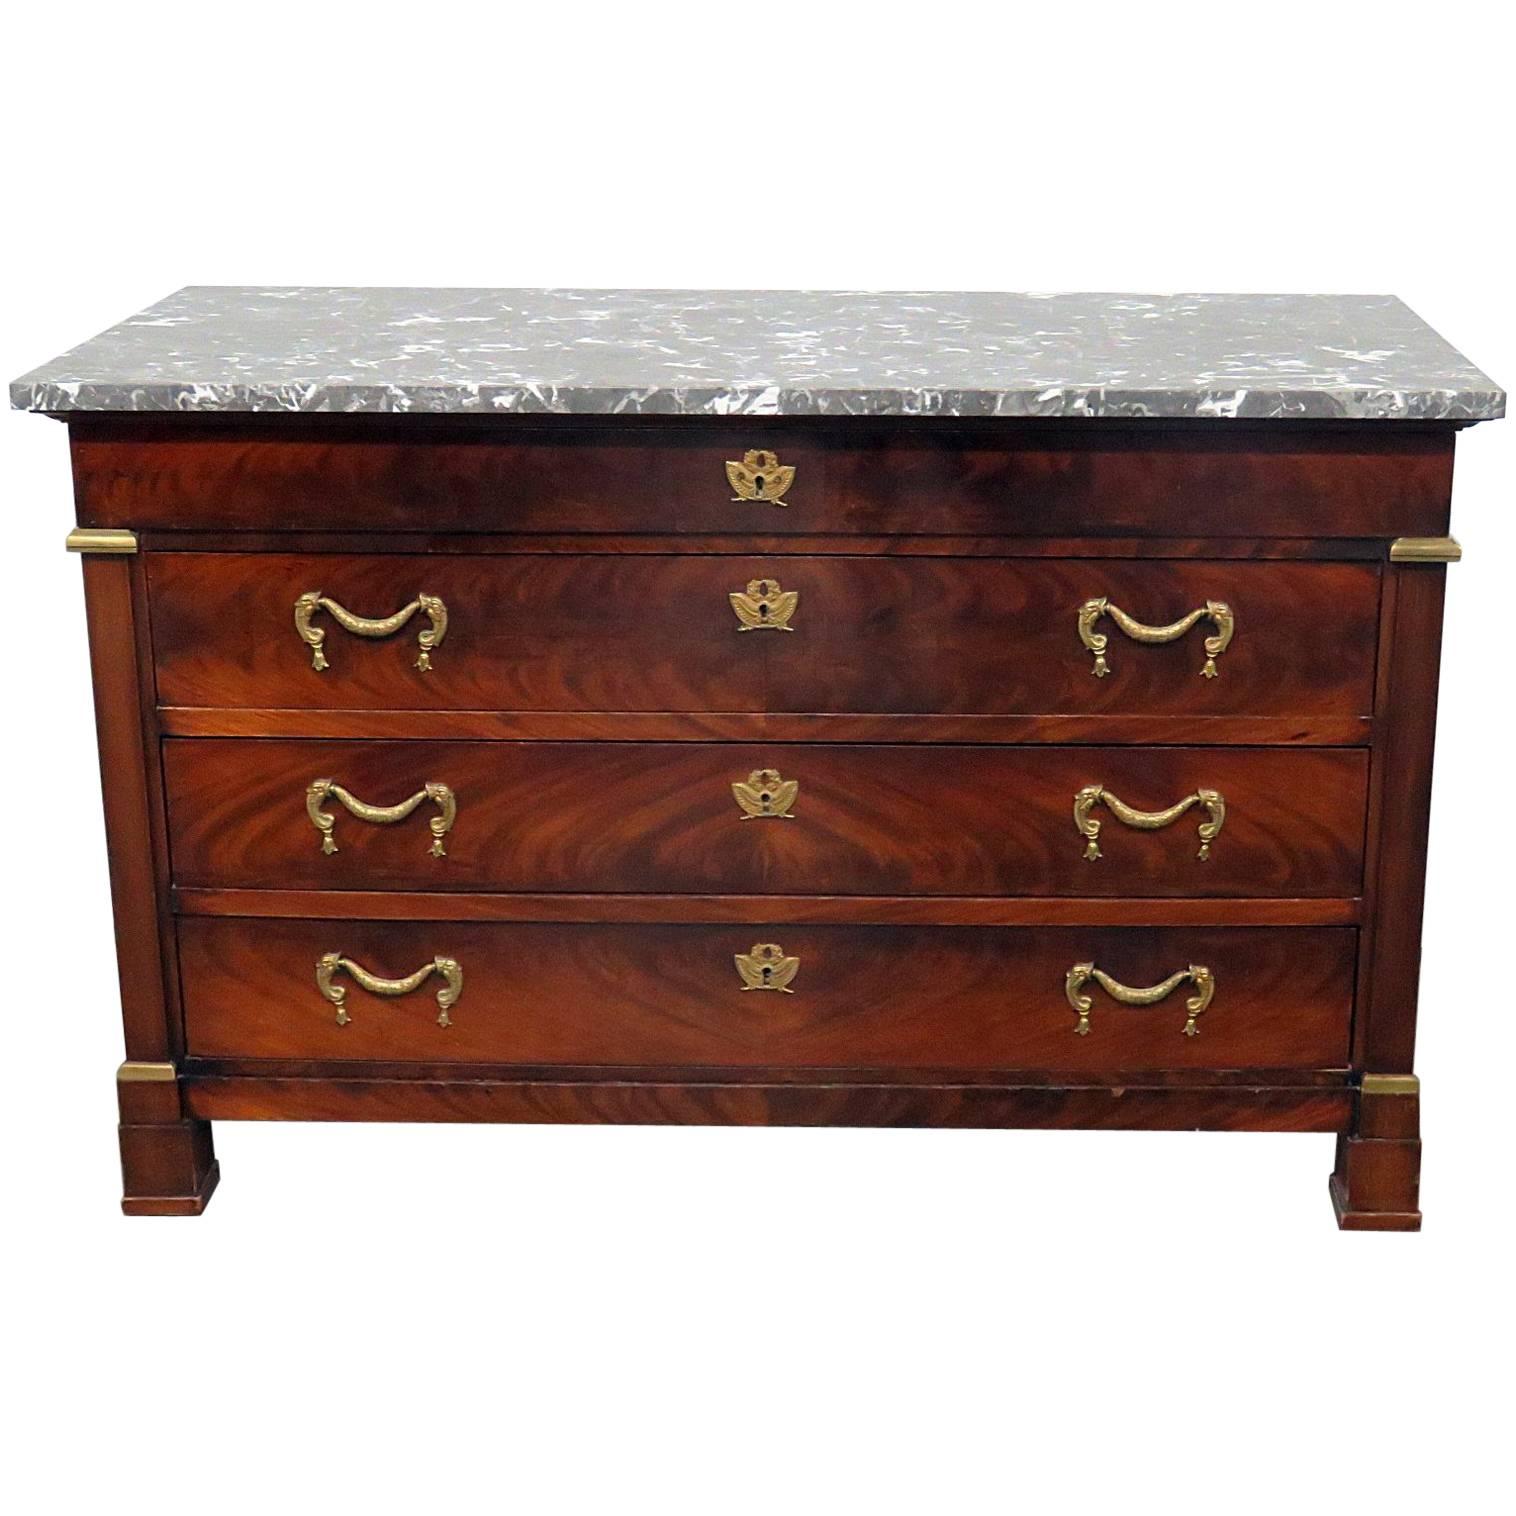 French Empire Style Marble-Top Commode